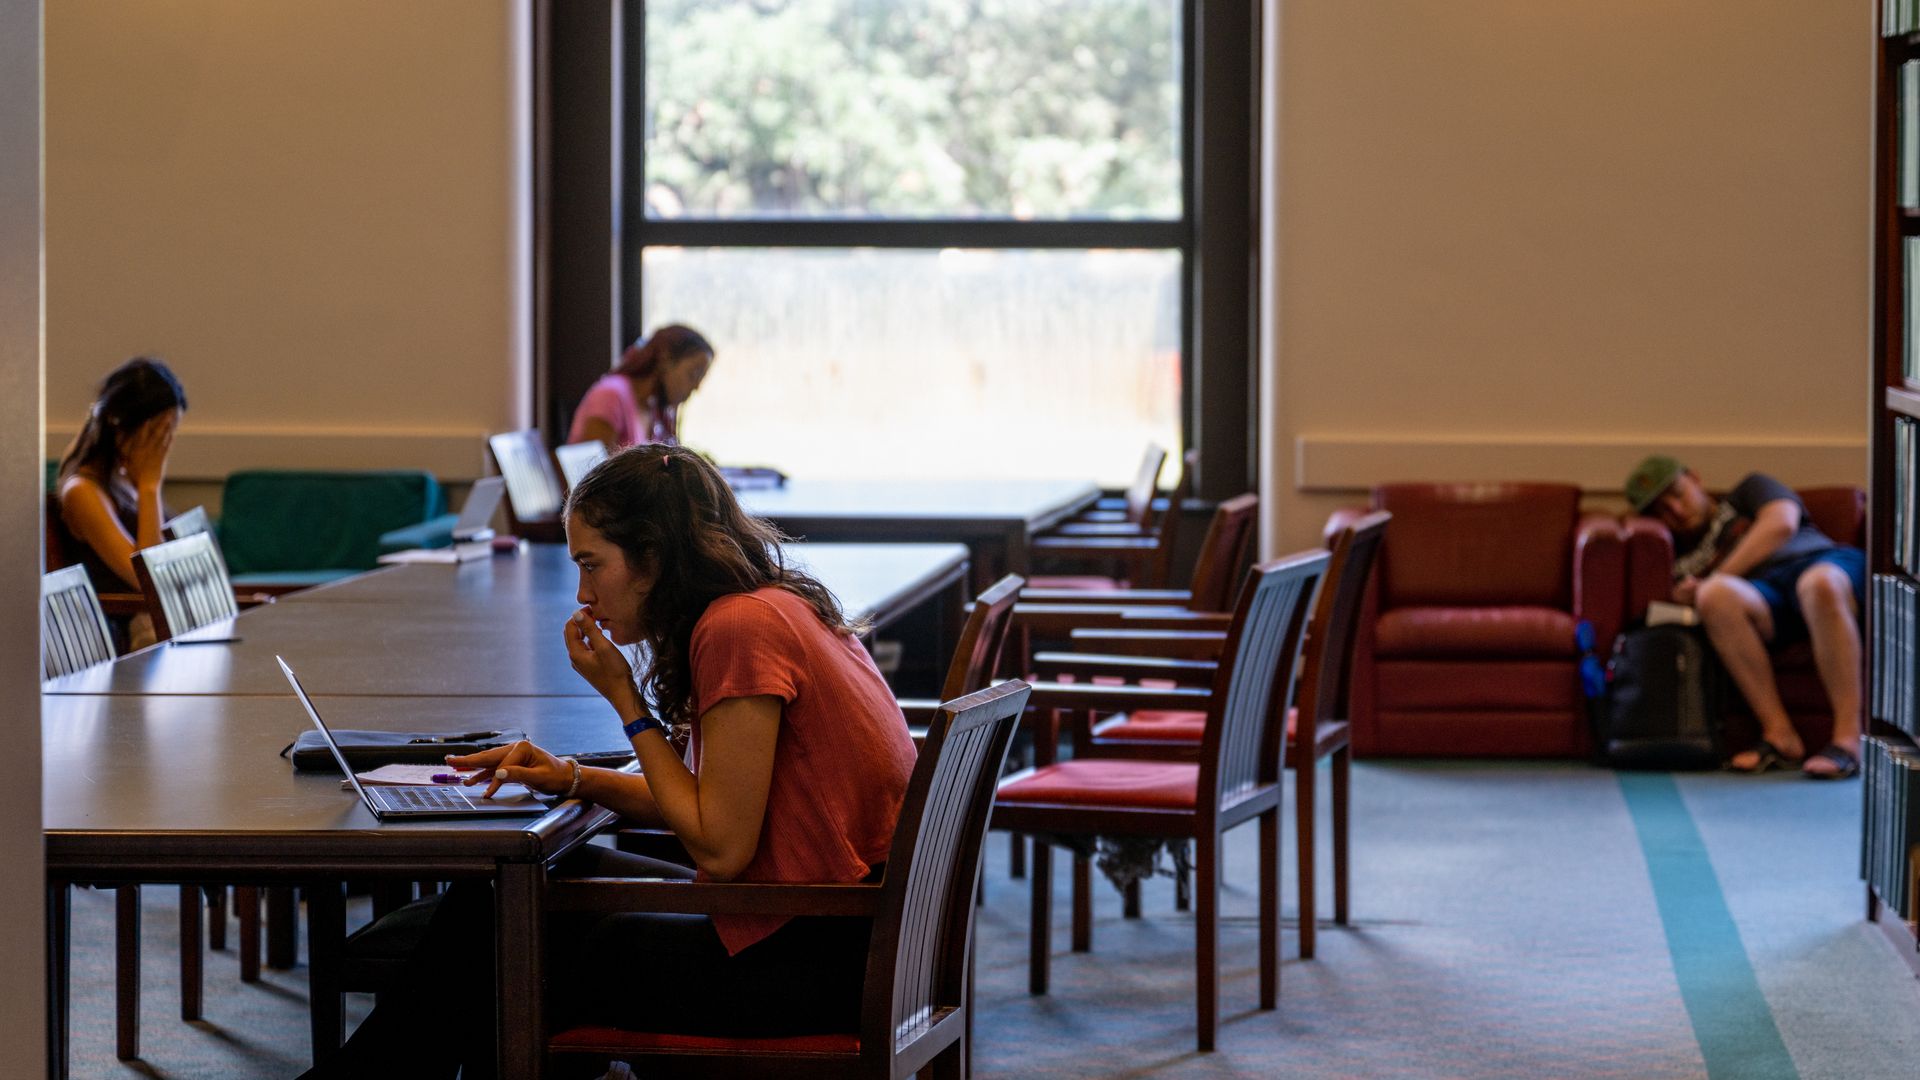 Students study in the Rice University Library on August 29, 2022 in Houston, Texas